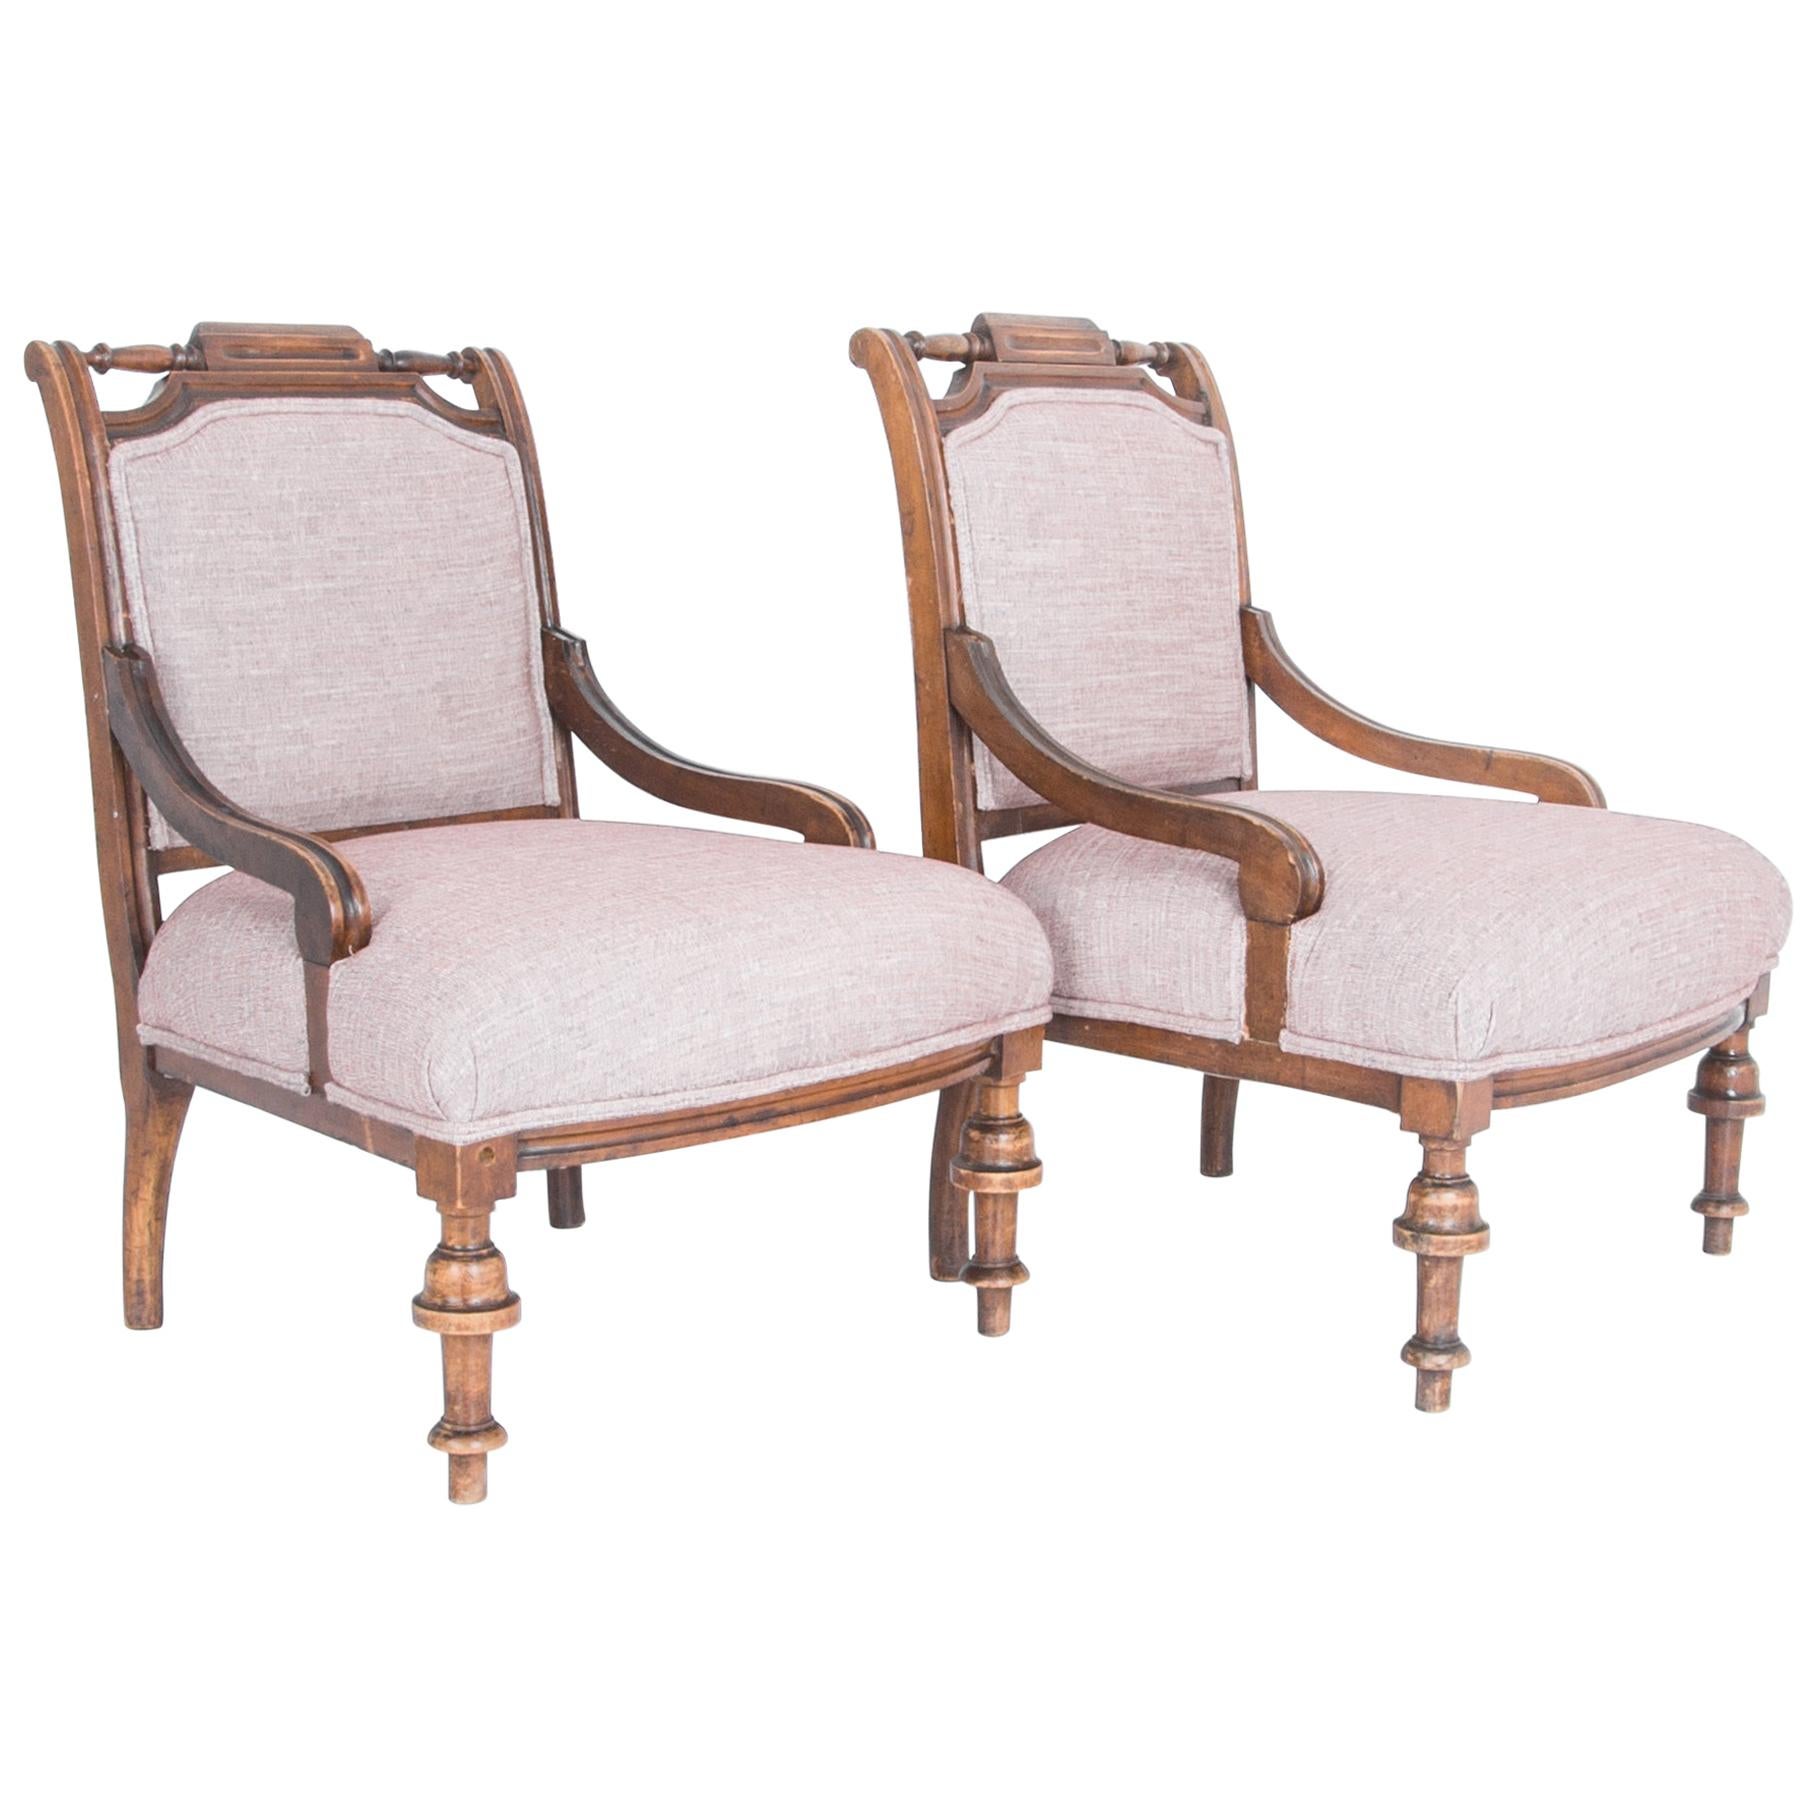 Late 19th Century French Upholstered Armchairs, a Pair